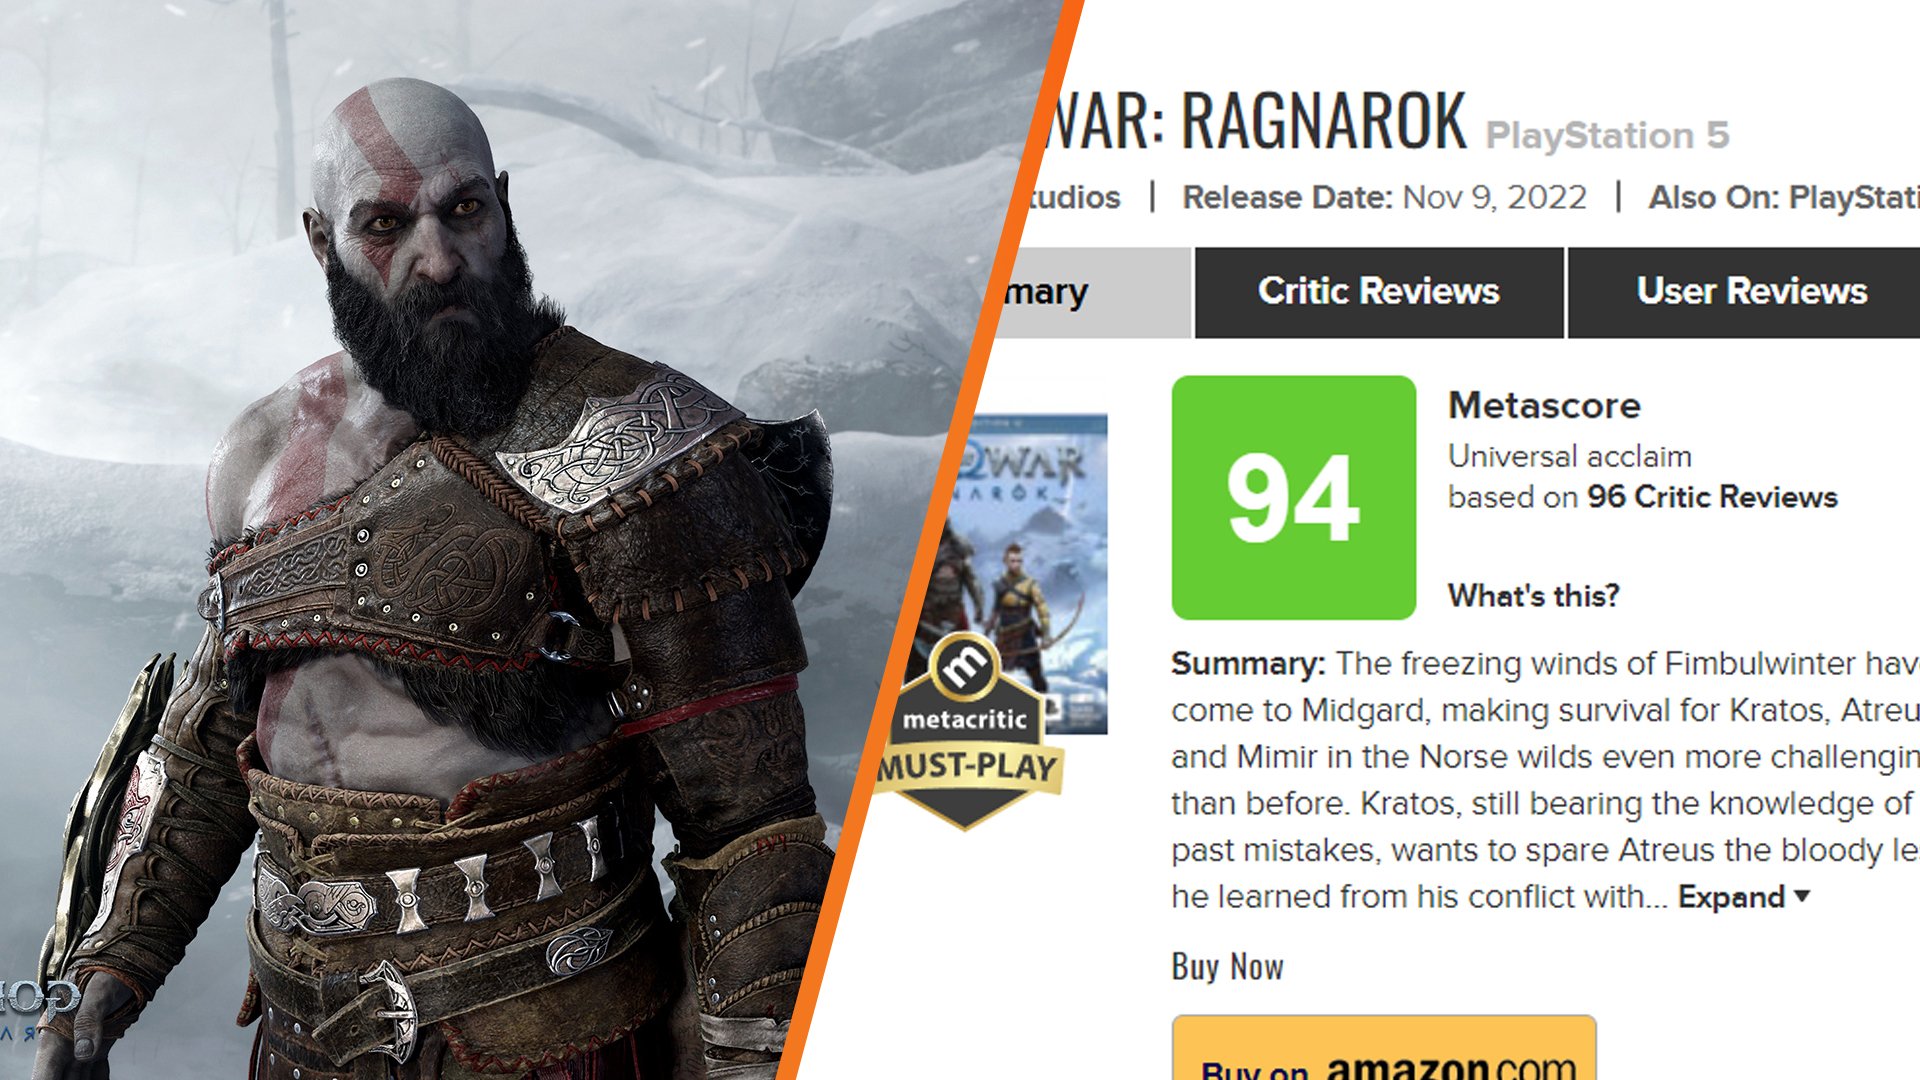 God of War Ragnarök is the second-highest-rated new game of the year